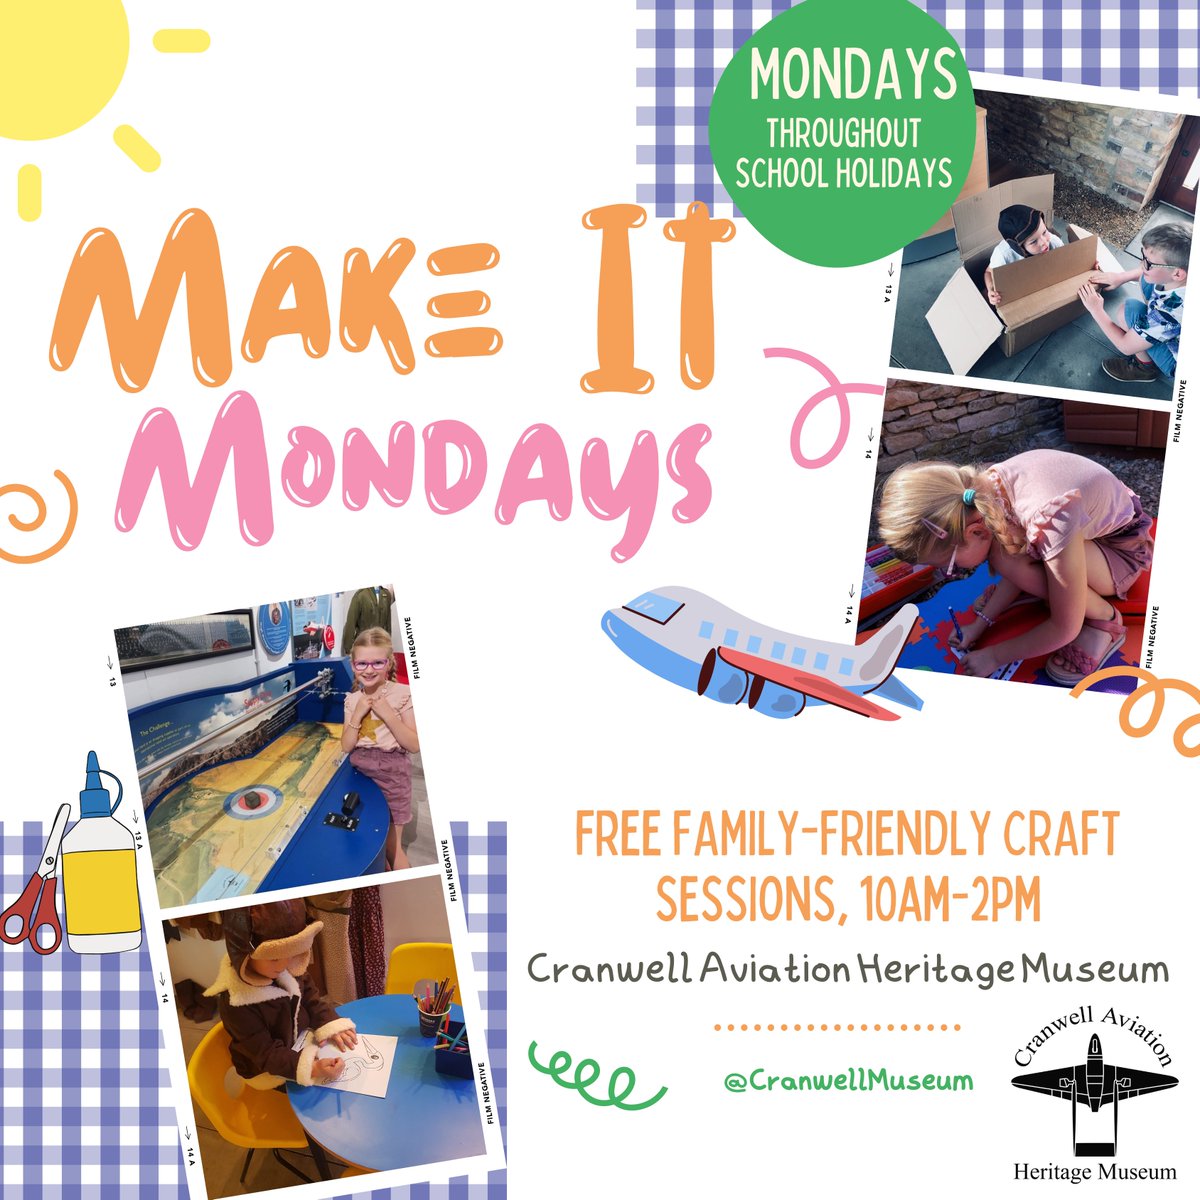 Don't forget our #MakeitMondays today 10-2 lots of free crafty things to do with your young ones @cottagemuseum @sandfordaward @Ex_Heritage @LincsKidsUk @kidsinmuseums @Visit_Lincs #MuseumsTogether #LincsConnect @heartoflincs 📷